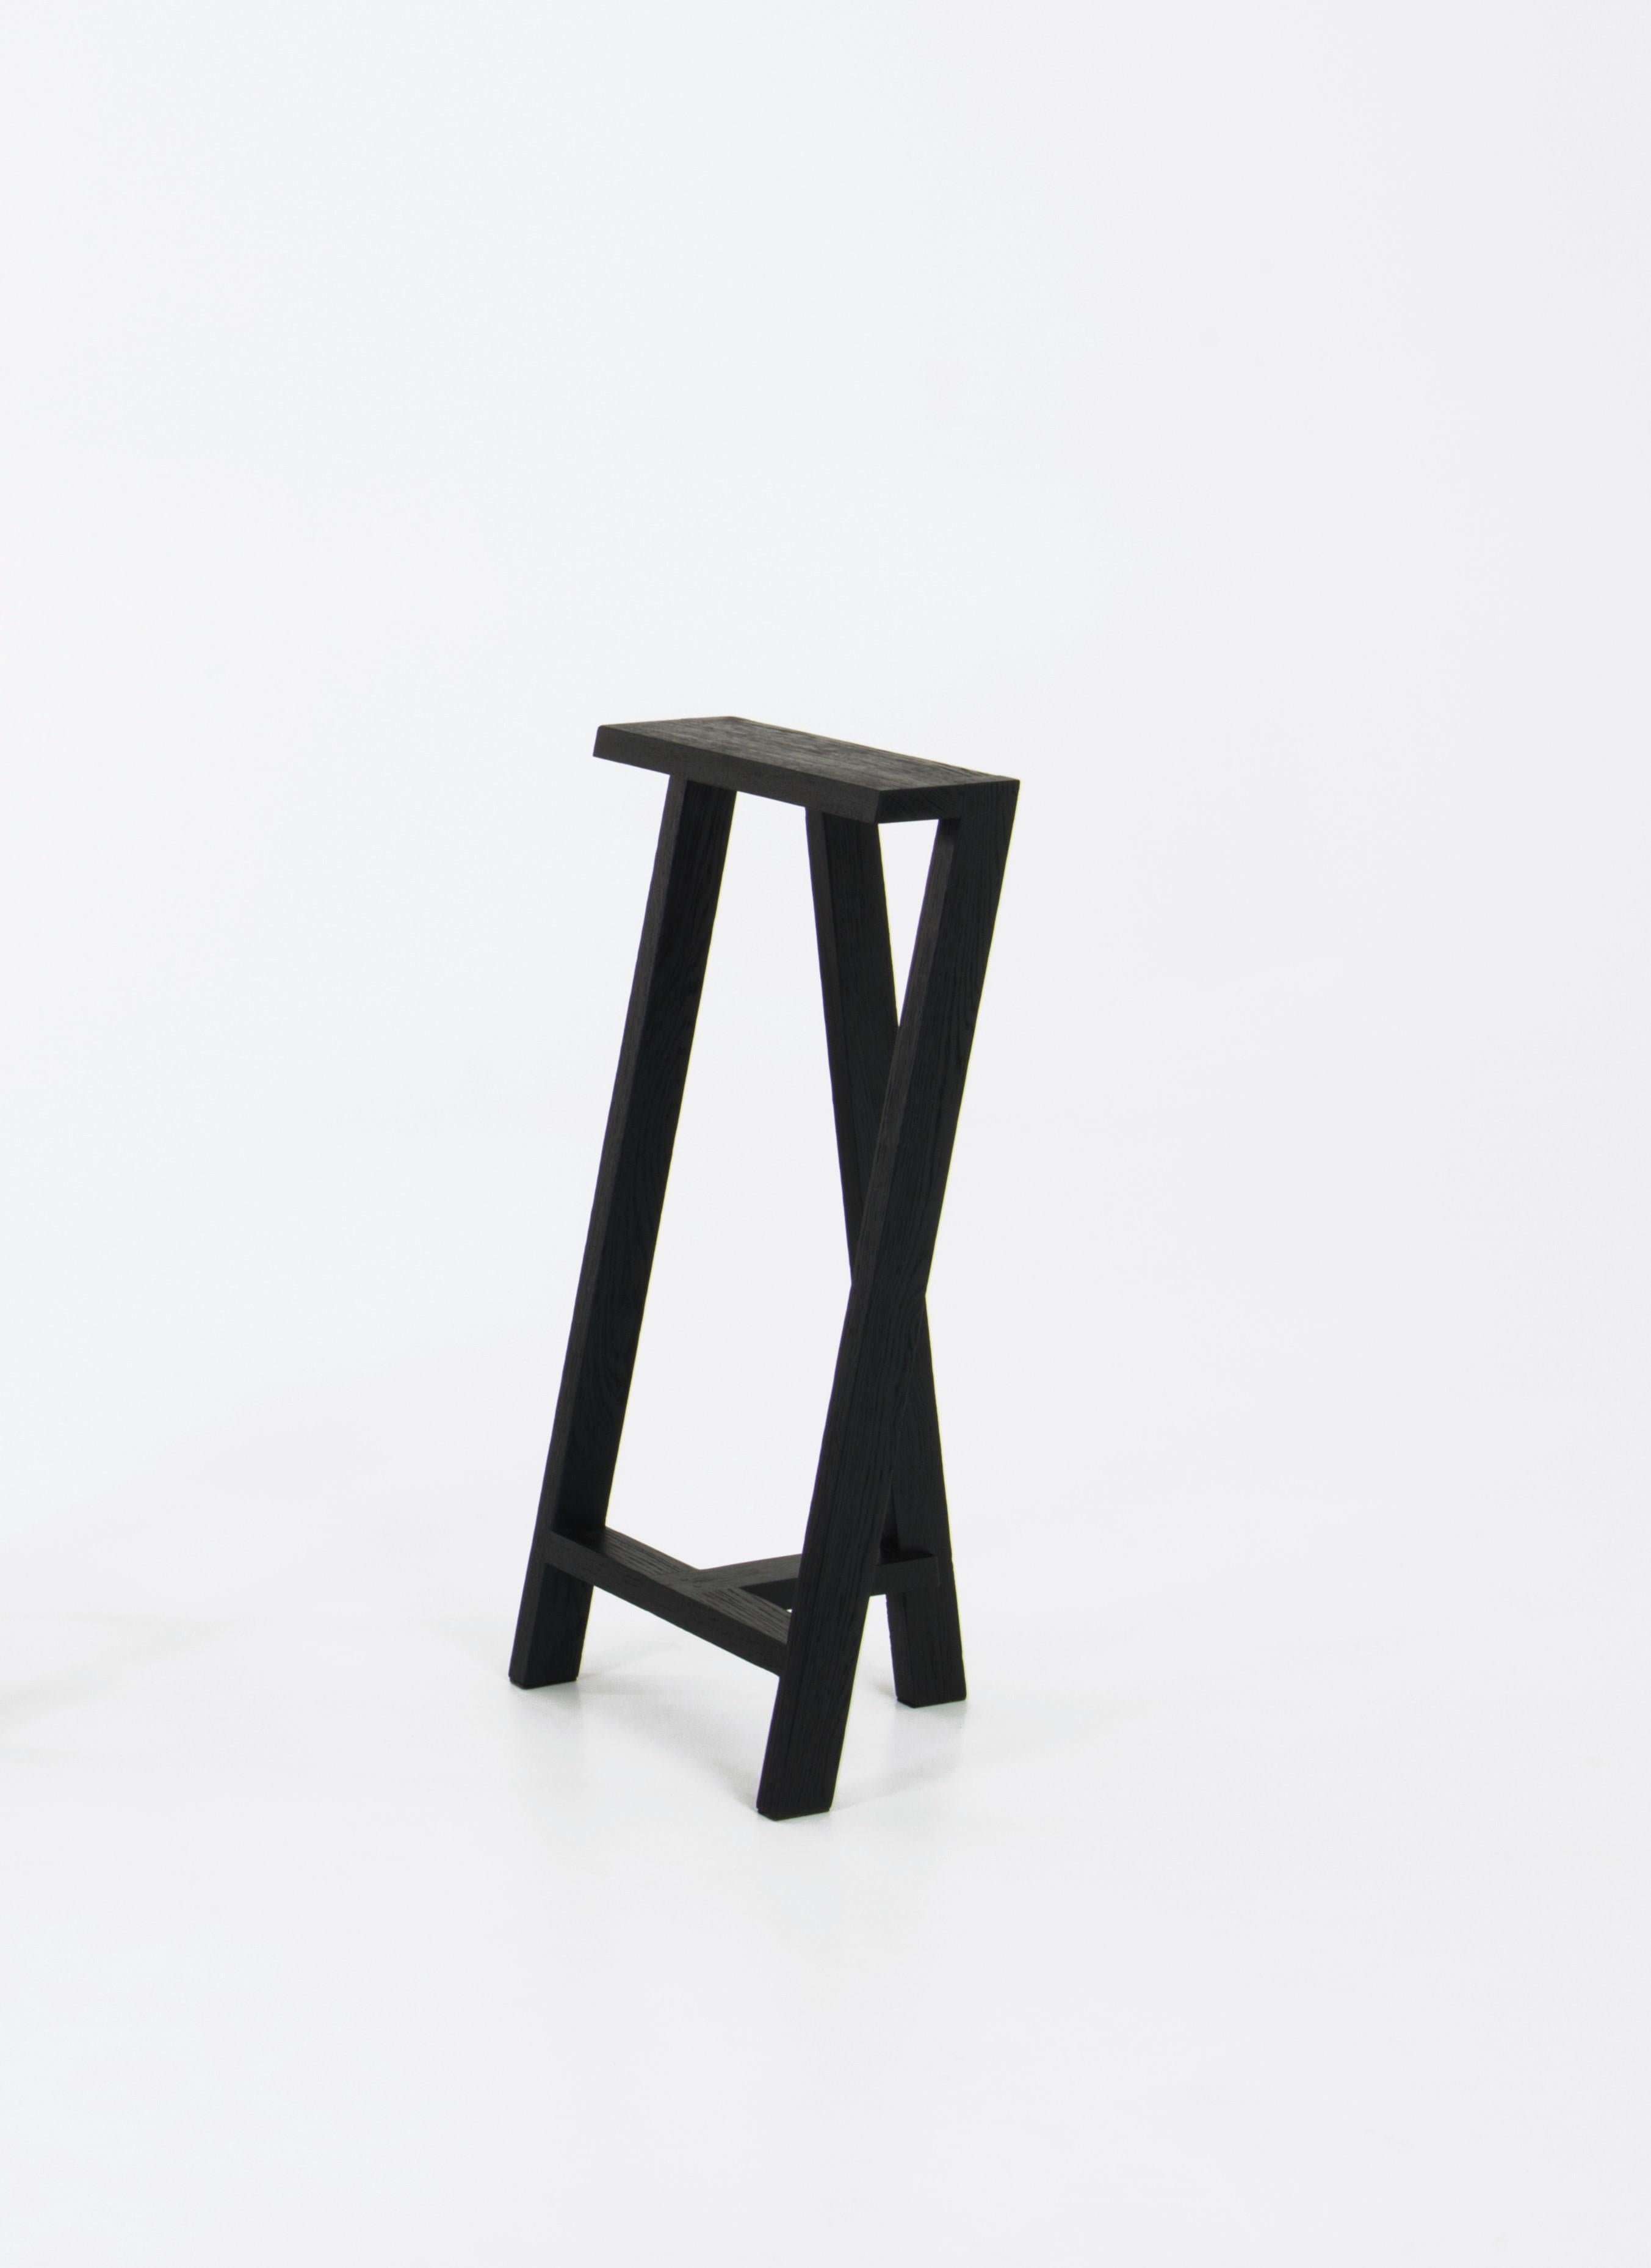 Medium Pausa oak stool by Pierre-Emmanuel Vandeputte
Dimensions: D 27 x W 35 x H 65 cm.
Materials: Burned oak wood.
Available in natural oak version and in 3 sizes.

Pausa is a series of stools; 45cm, 65cm, or 80cm of assembled oak pieces.